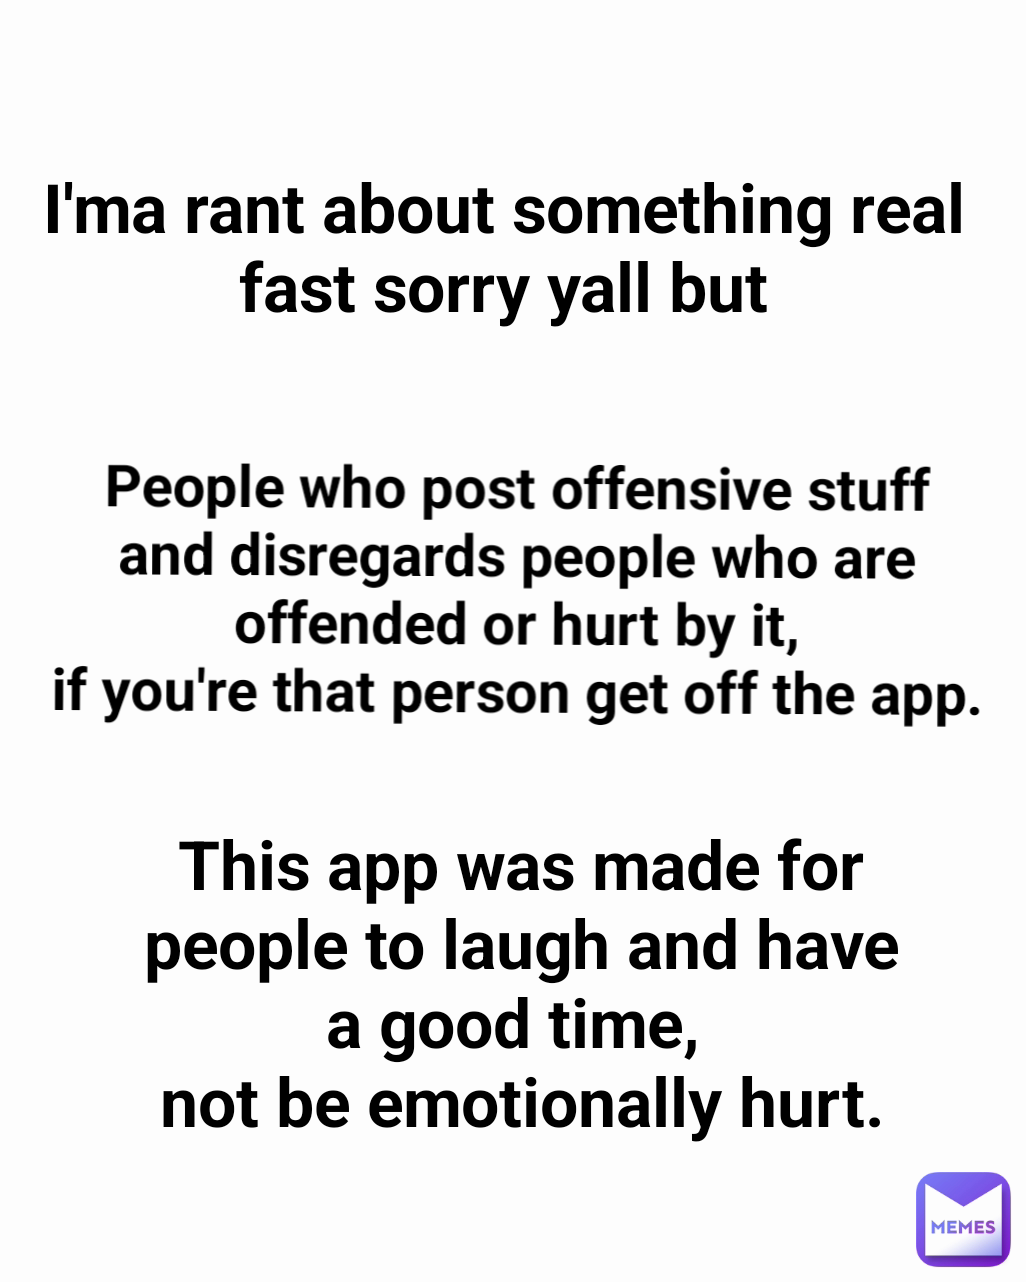 People who post offensive stuff and disregards people who are offended or hurt by it,
if you're that person get off the app. This app was made for people to laugh and have a good time, 
not be emotionally hurt. I'ma rant about something real fast sorry yall but